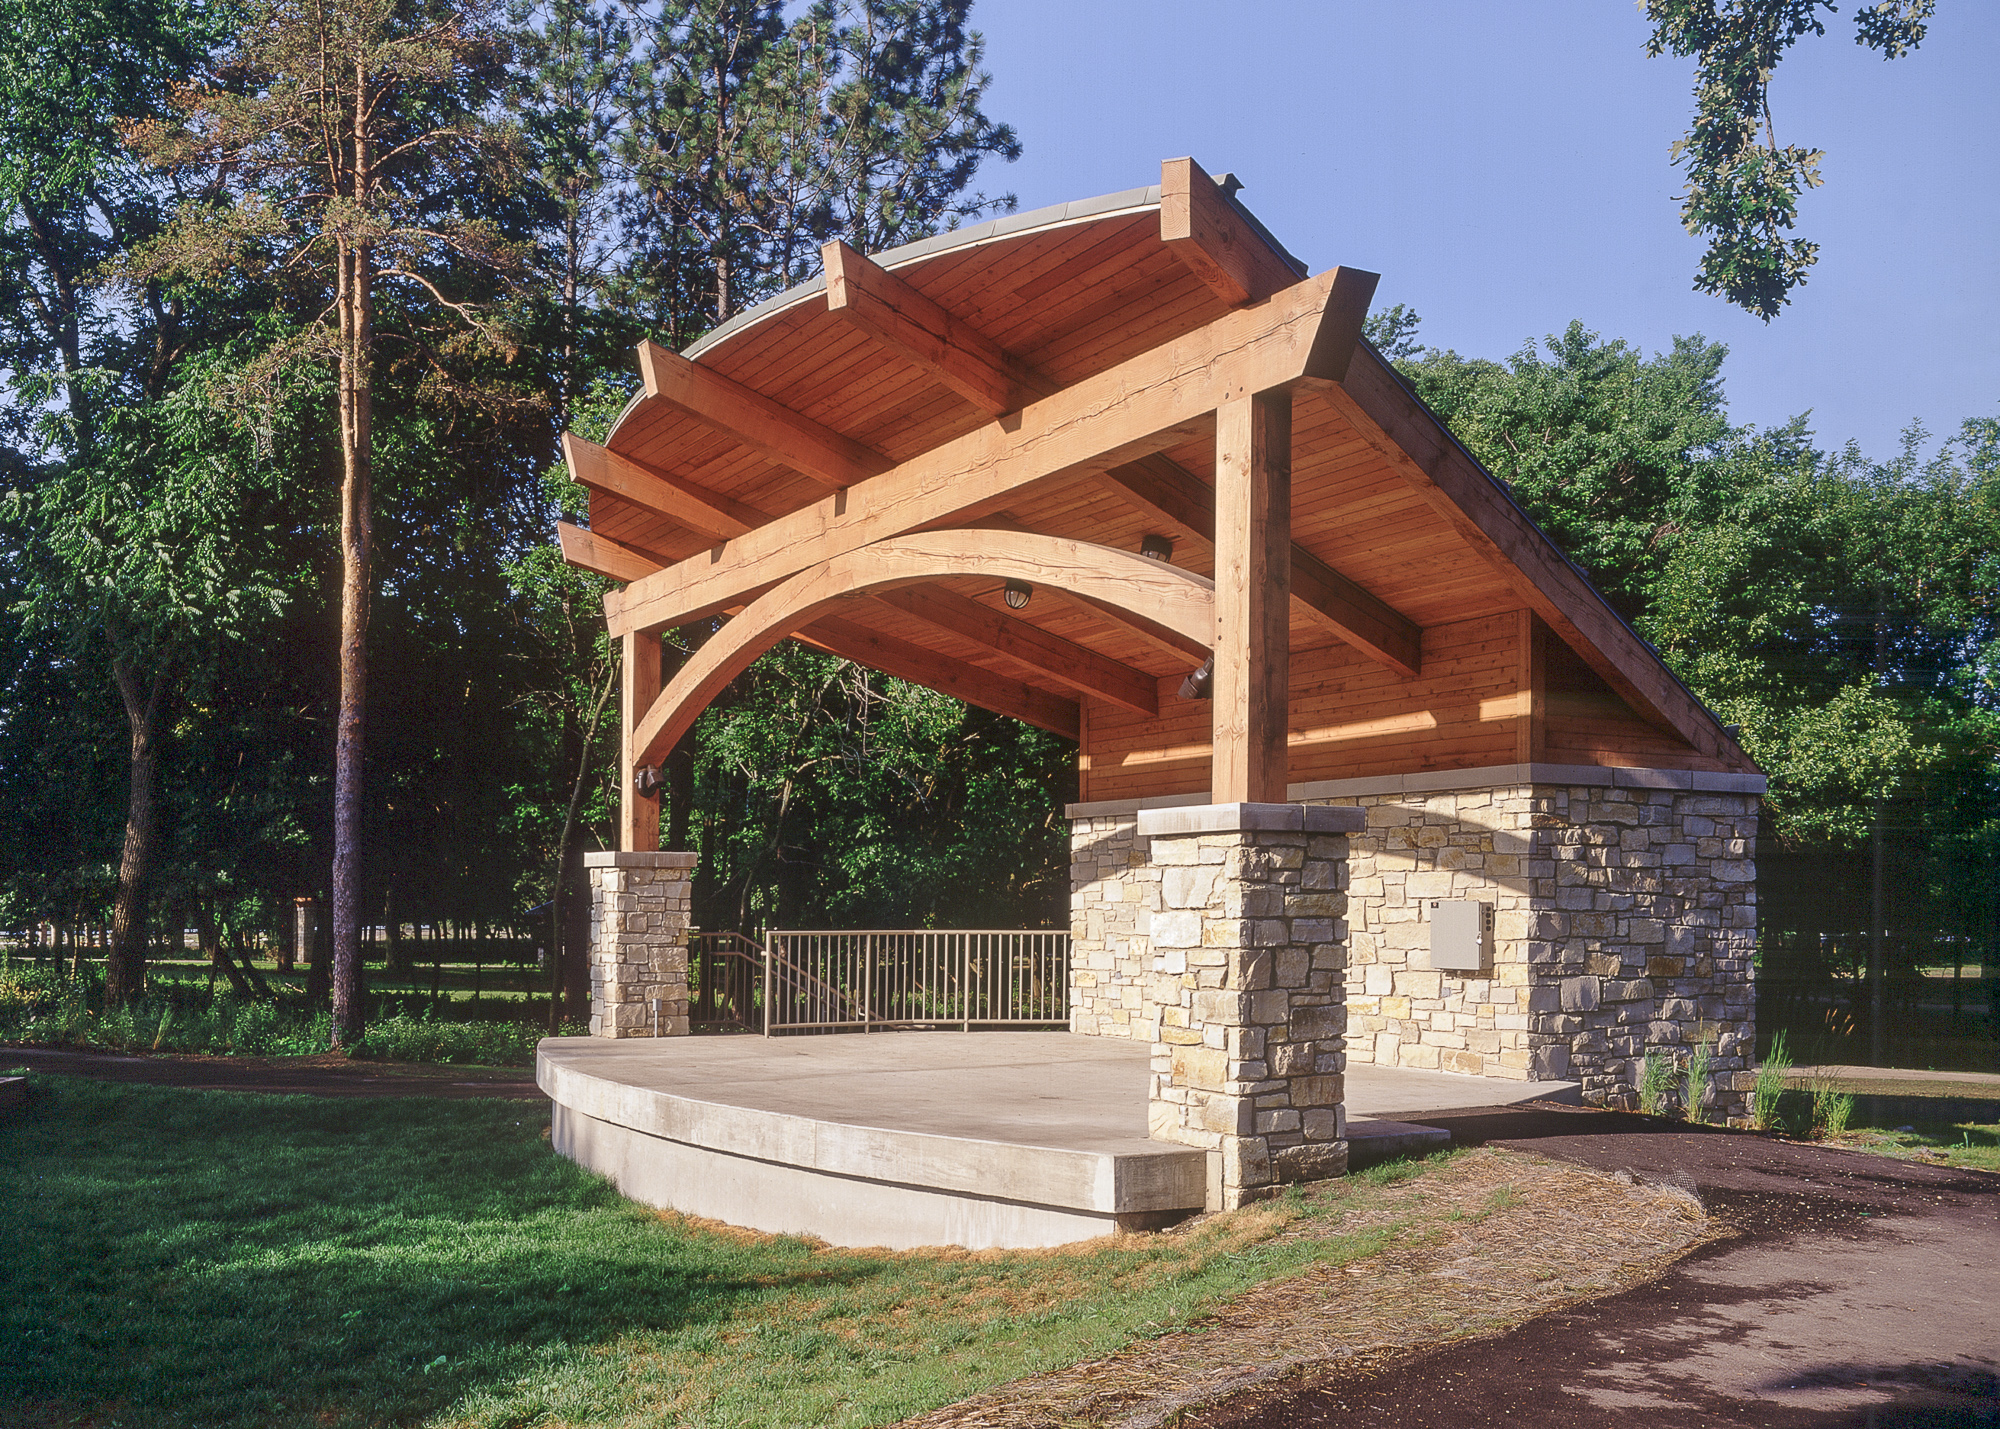 Outdoor Theater with Timber Posts, an Arched Beam and a Sturdy Timber Roof